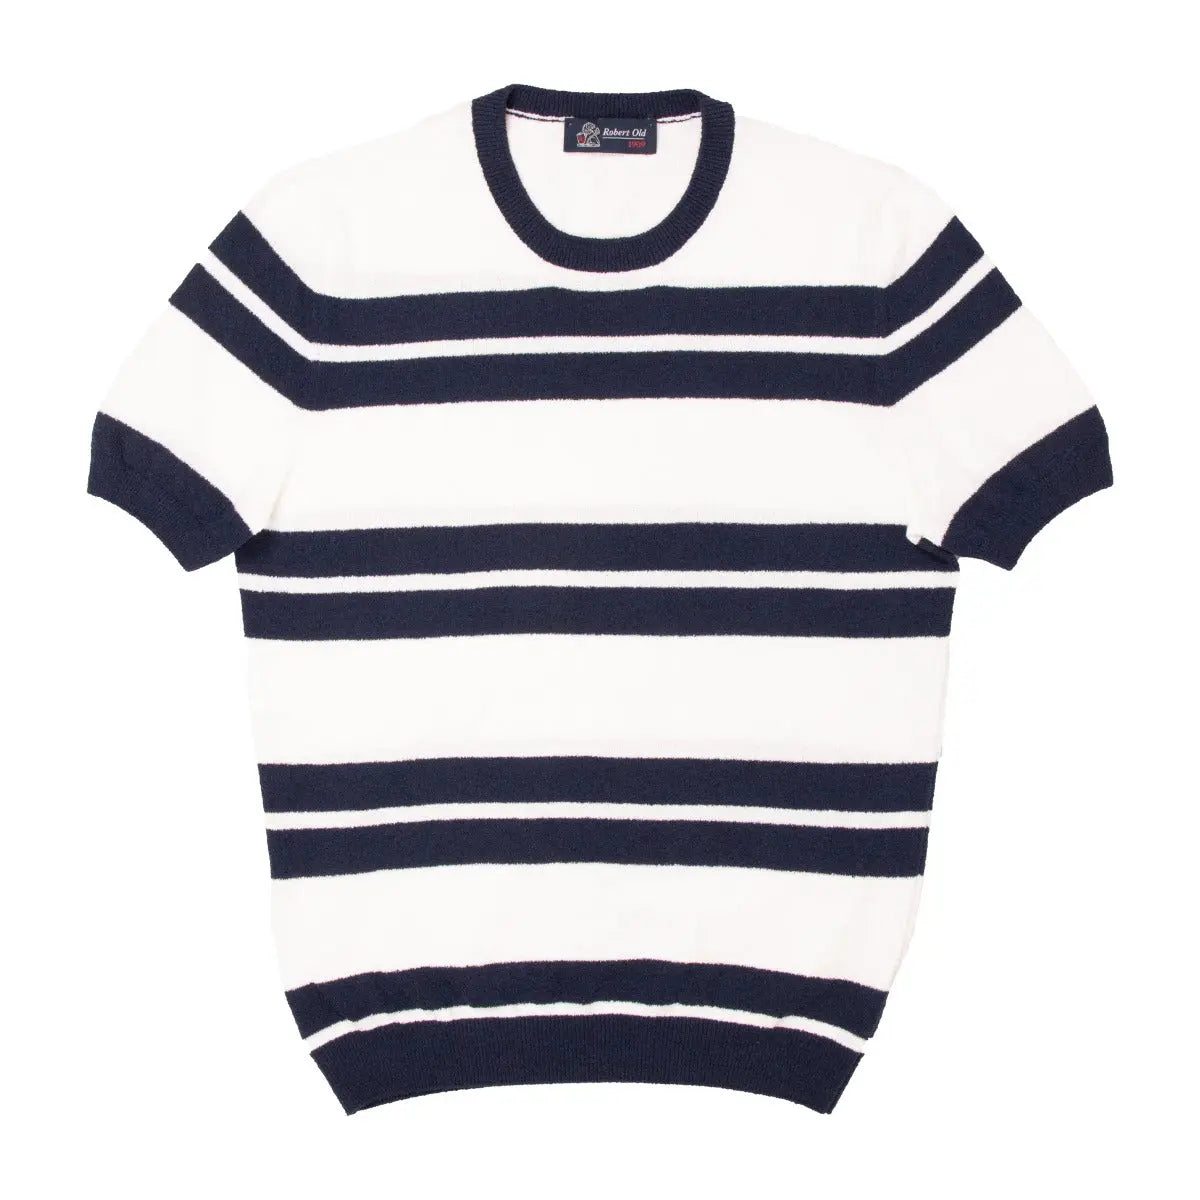 White & Navy Striped Towelling T-Shirt  Robert Old   